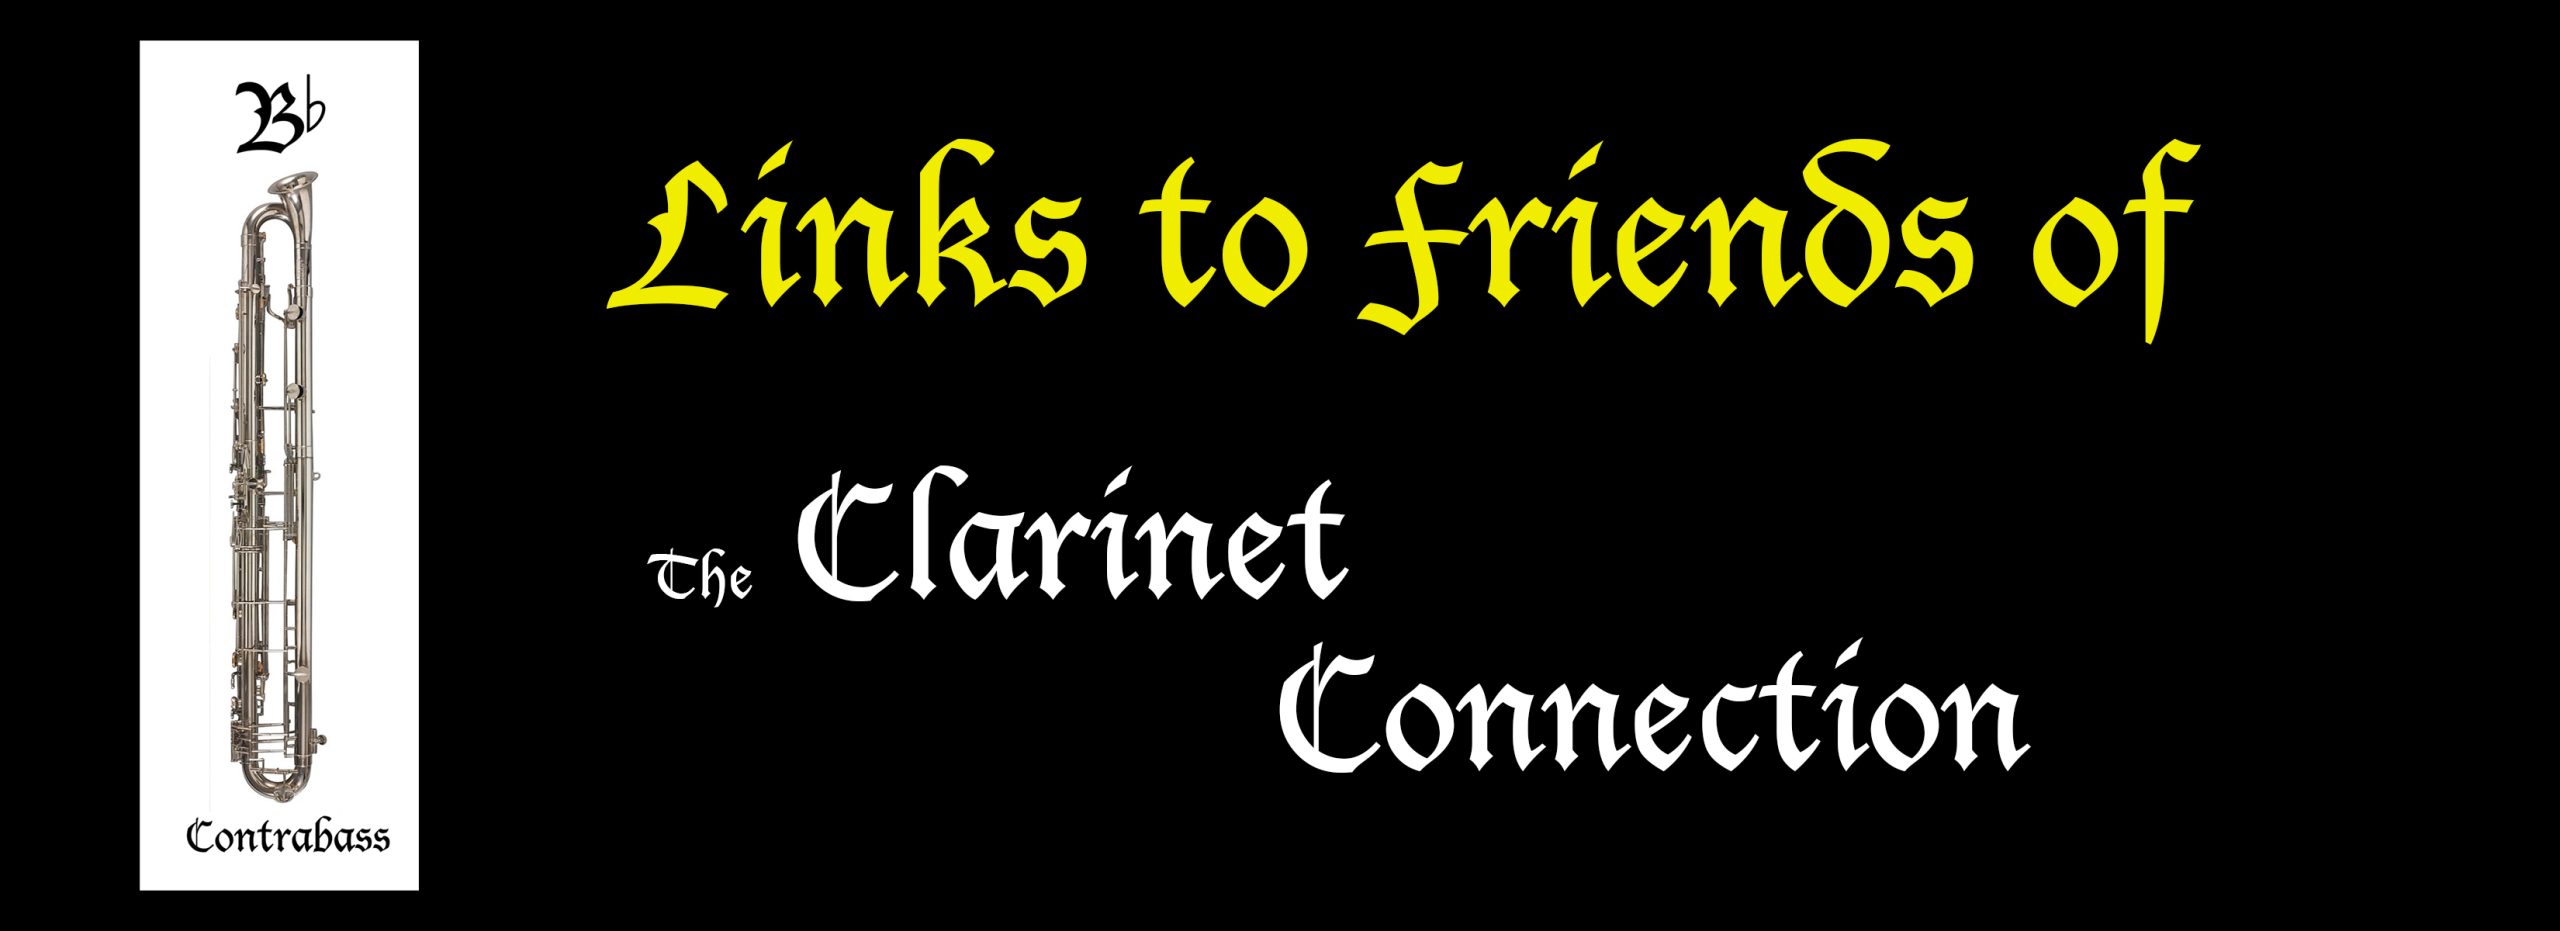 links to friends of the Clarinet Connection